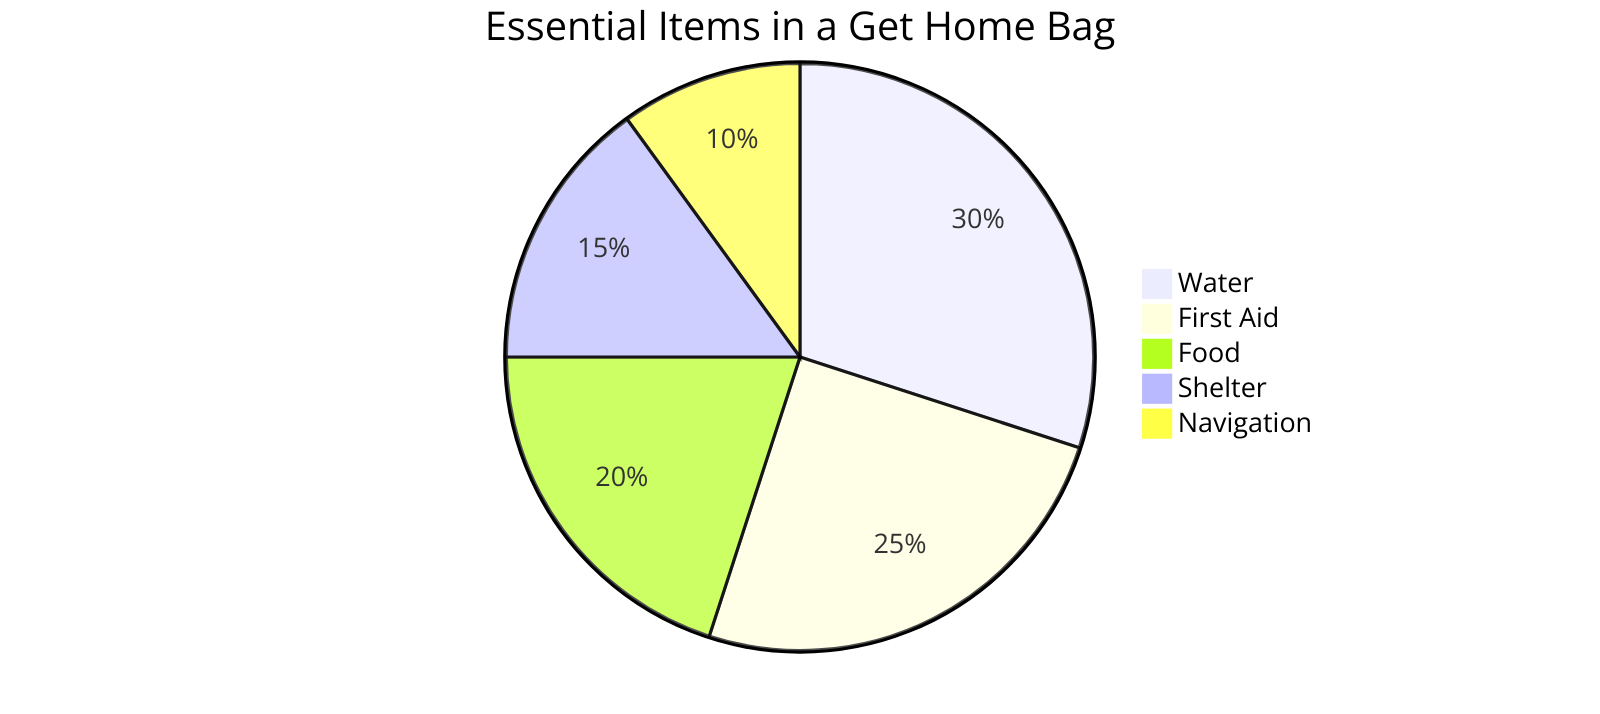  the distribution of essential items in a Get Home Bag, such as water, food, shelter, navigation, and first aid, highlighting the proportion each category should occupy in the bag